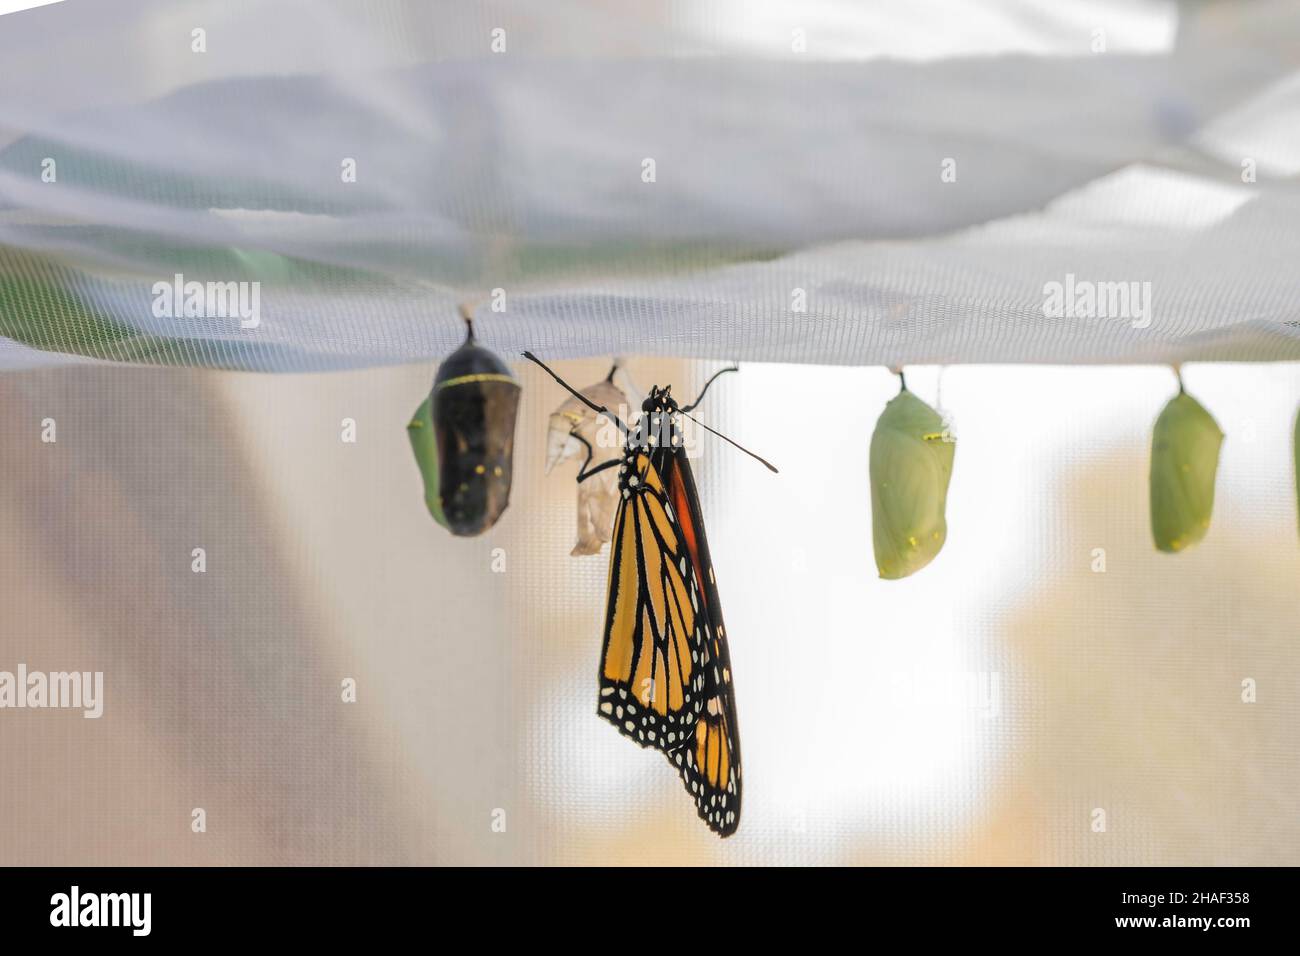 A Monarch butterfly, Danaus plexippus, newly emerged from chrysalis at the top of a butterfly cage with other chrysalises. Kansas, USA. Stock Photo